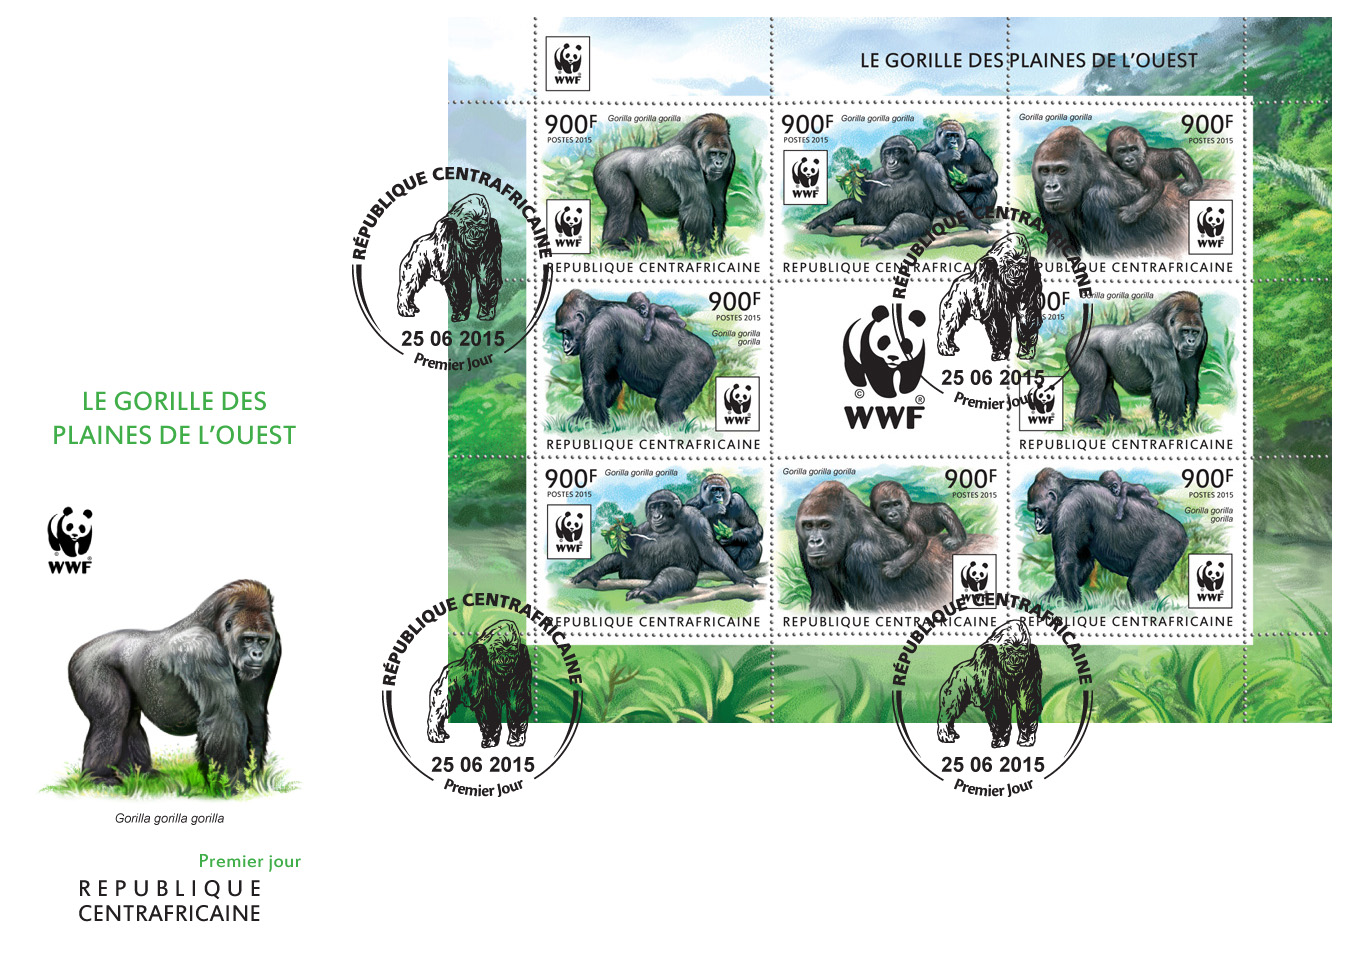 WWF – Gorilla (FDC) - Issue of Central African republic postage stamps